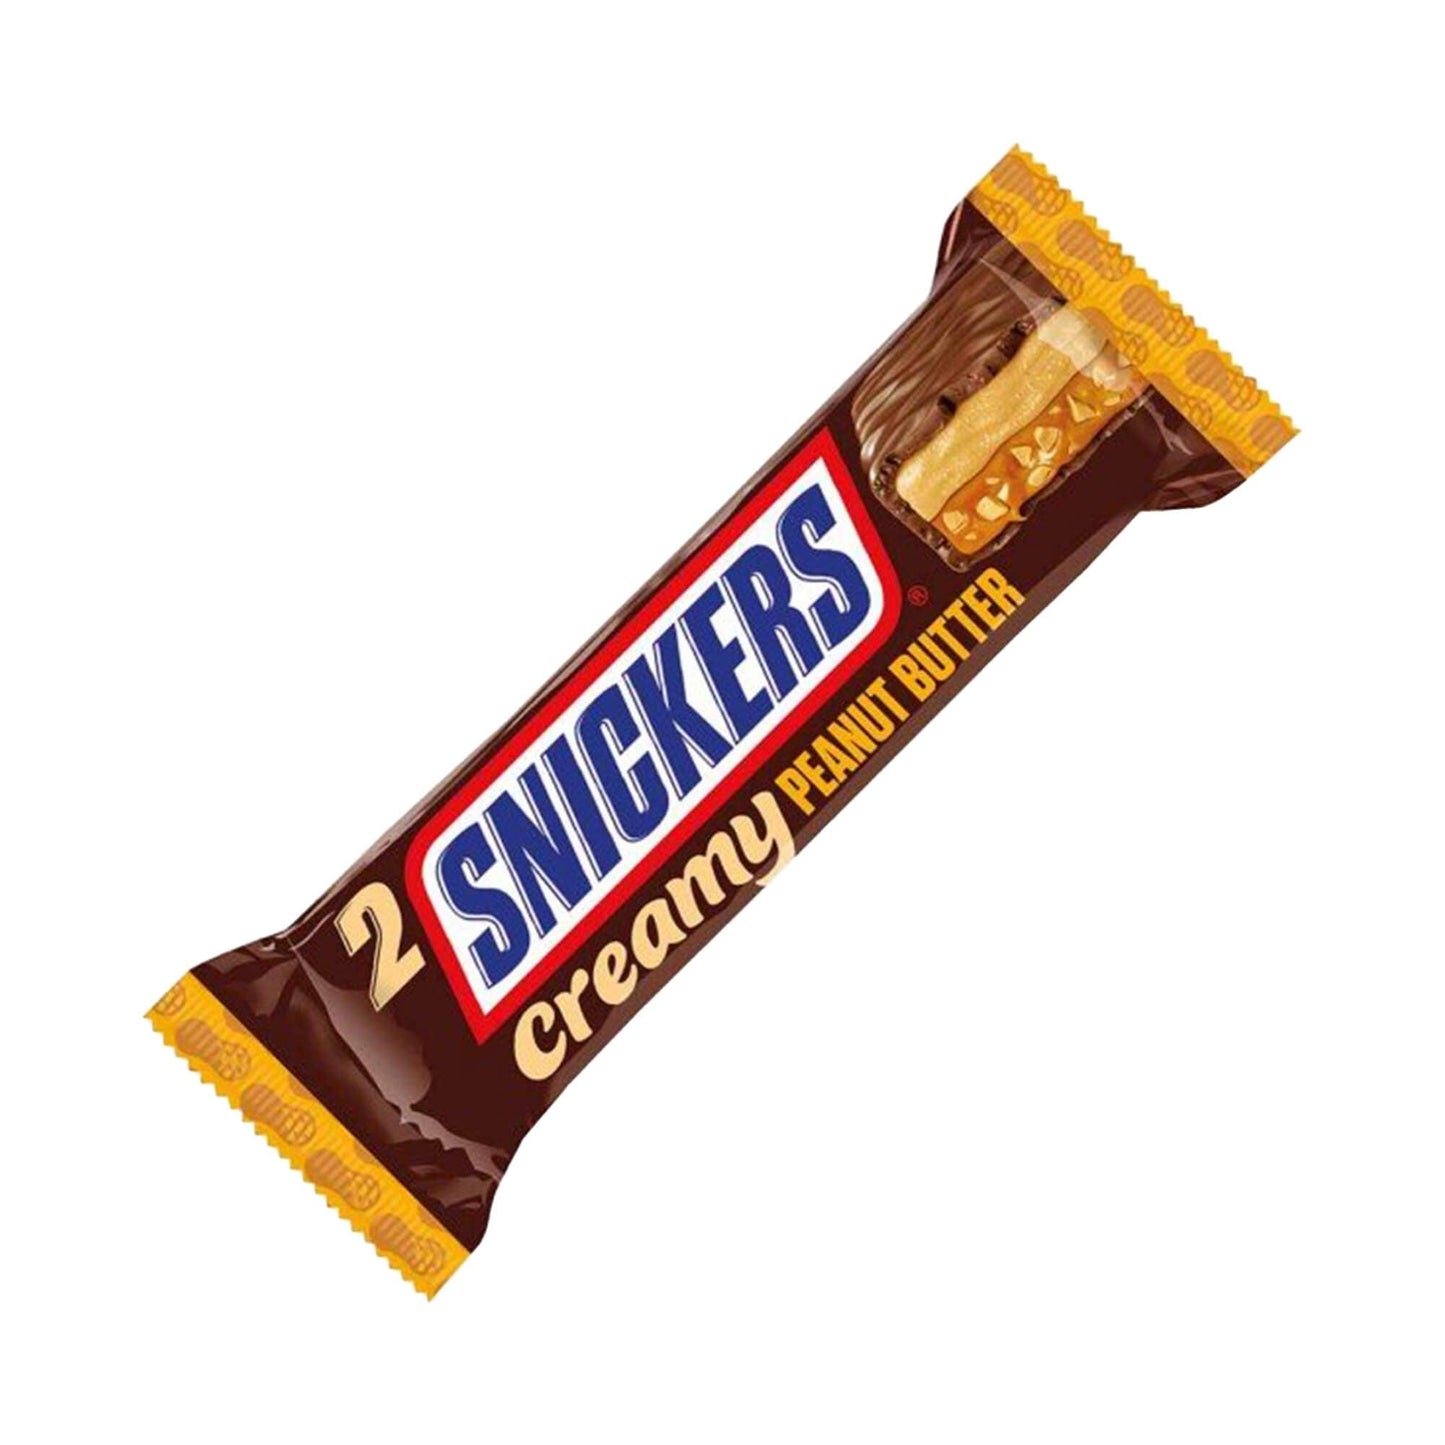 Snickers - Creamy Peanut Butter